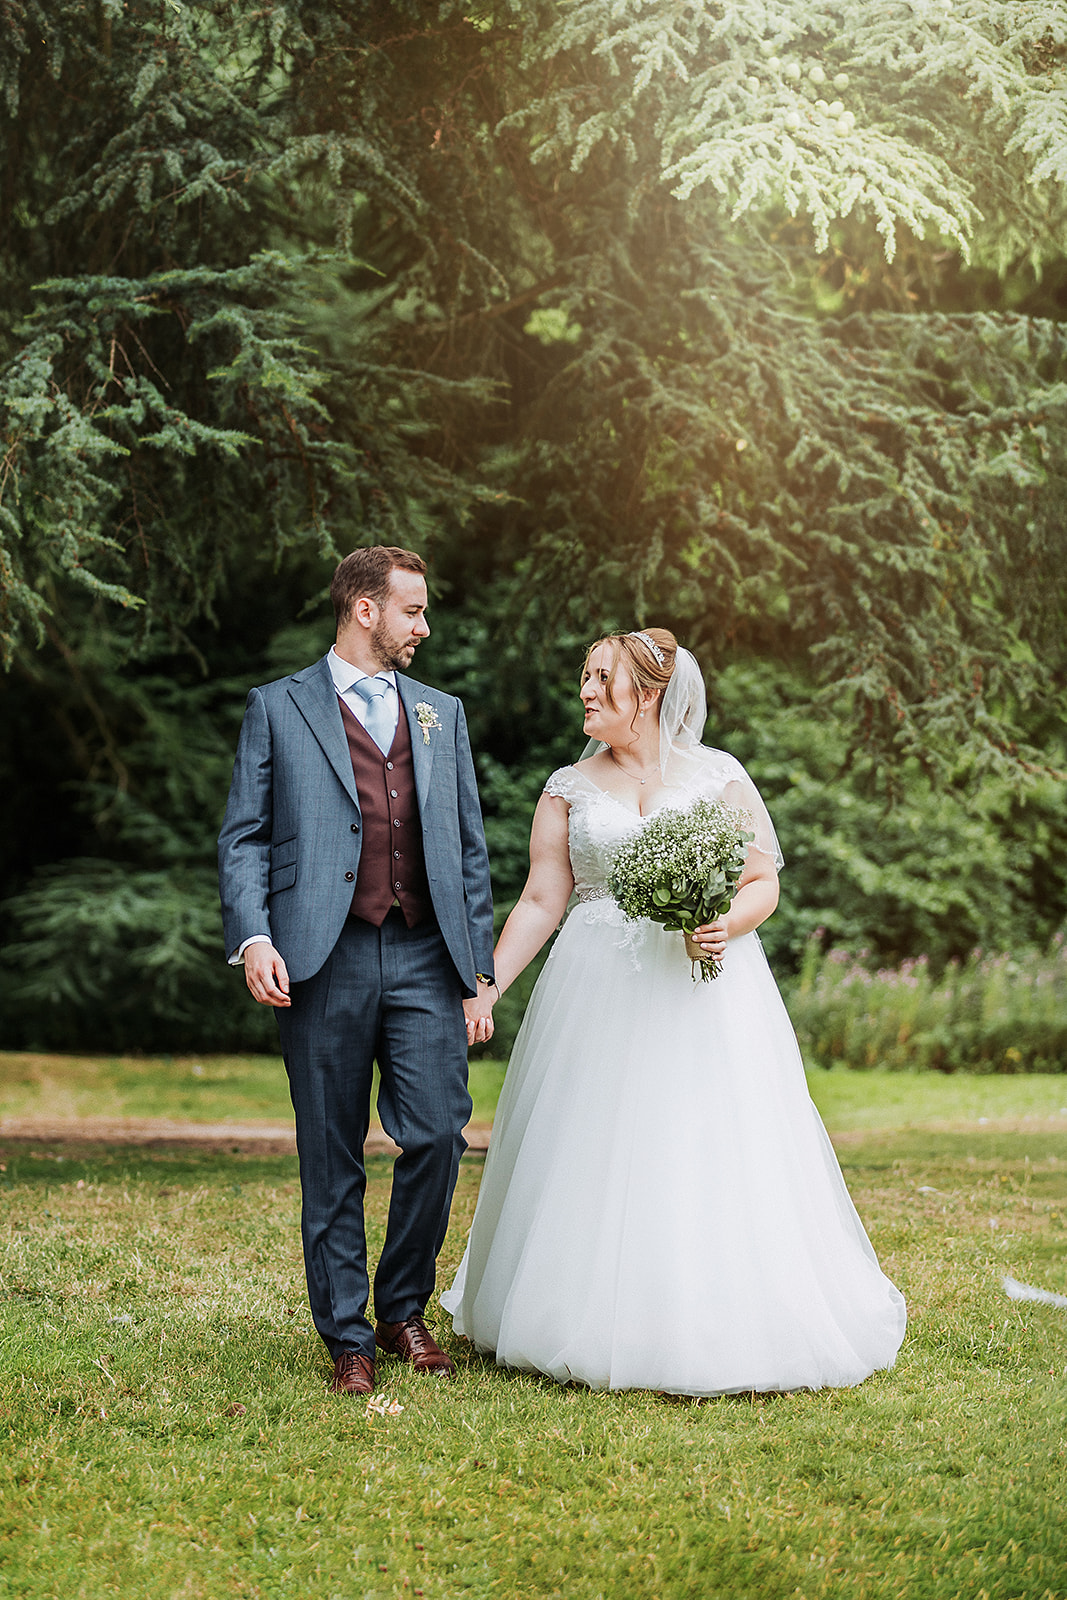 Bride and groom walking the grounds of Pendley Manor, Tring. Wedding Photo by Perfect Memories photography